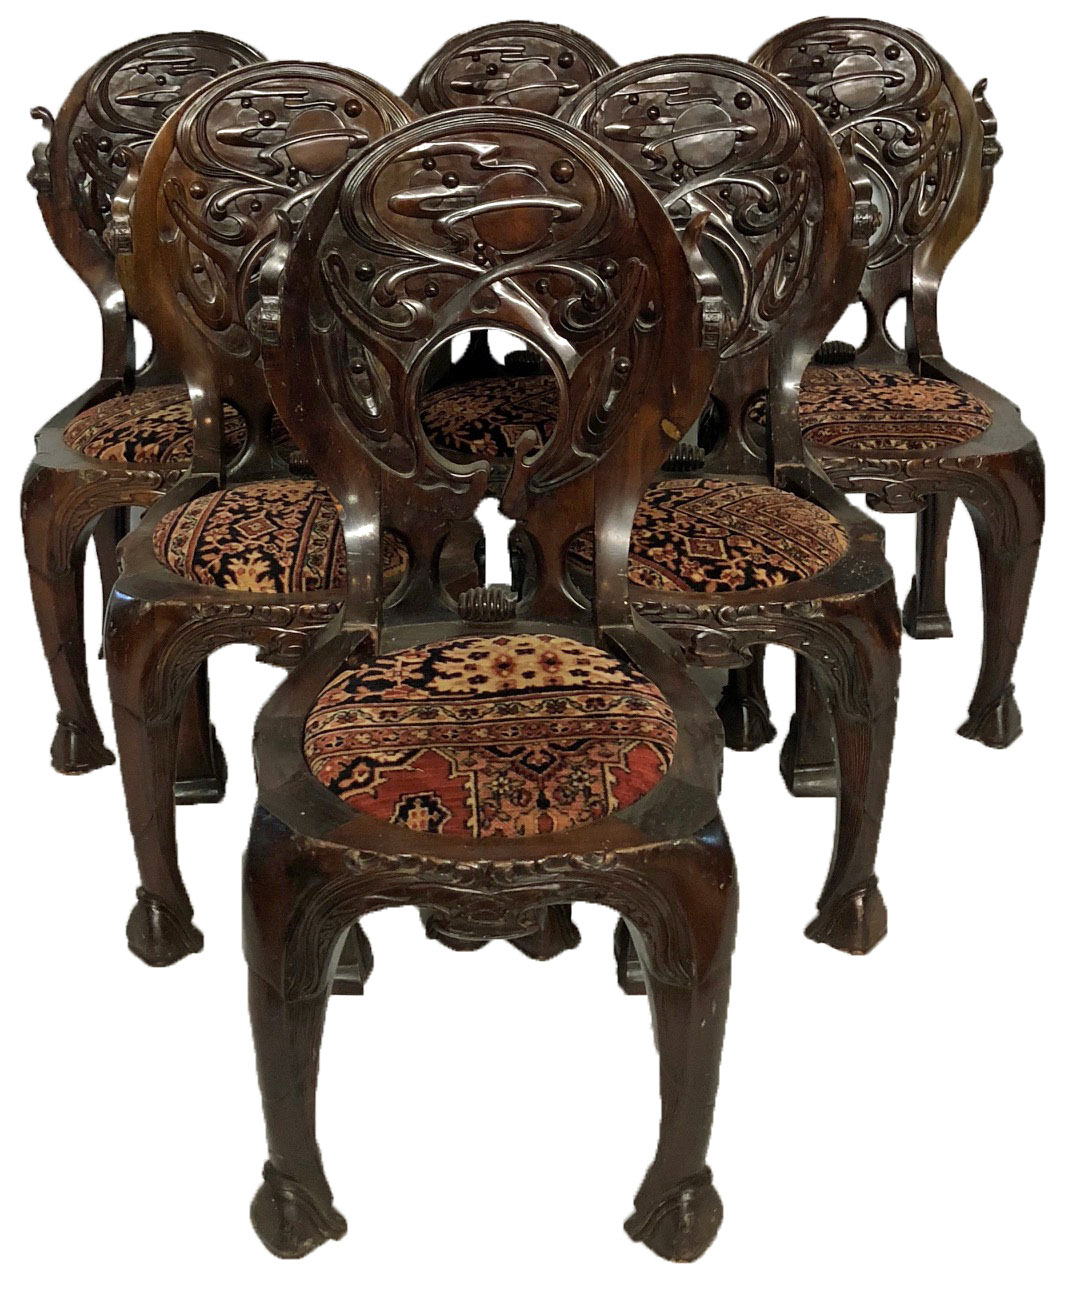 AN UNUSUAL SET OF SIX 20TH CENTURY CARVED HARDWOOD ORGANIC FORM CHAIRS The backs caved with orbiting